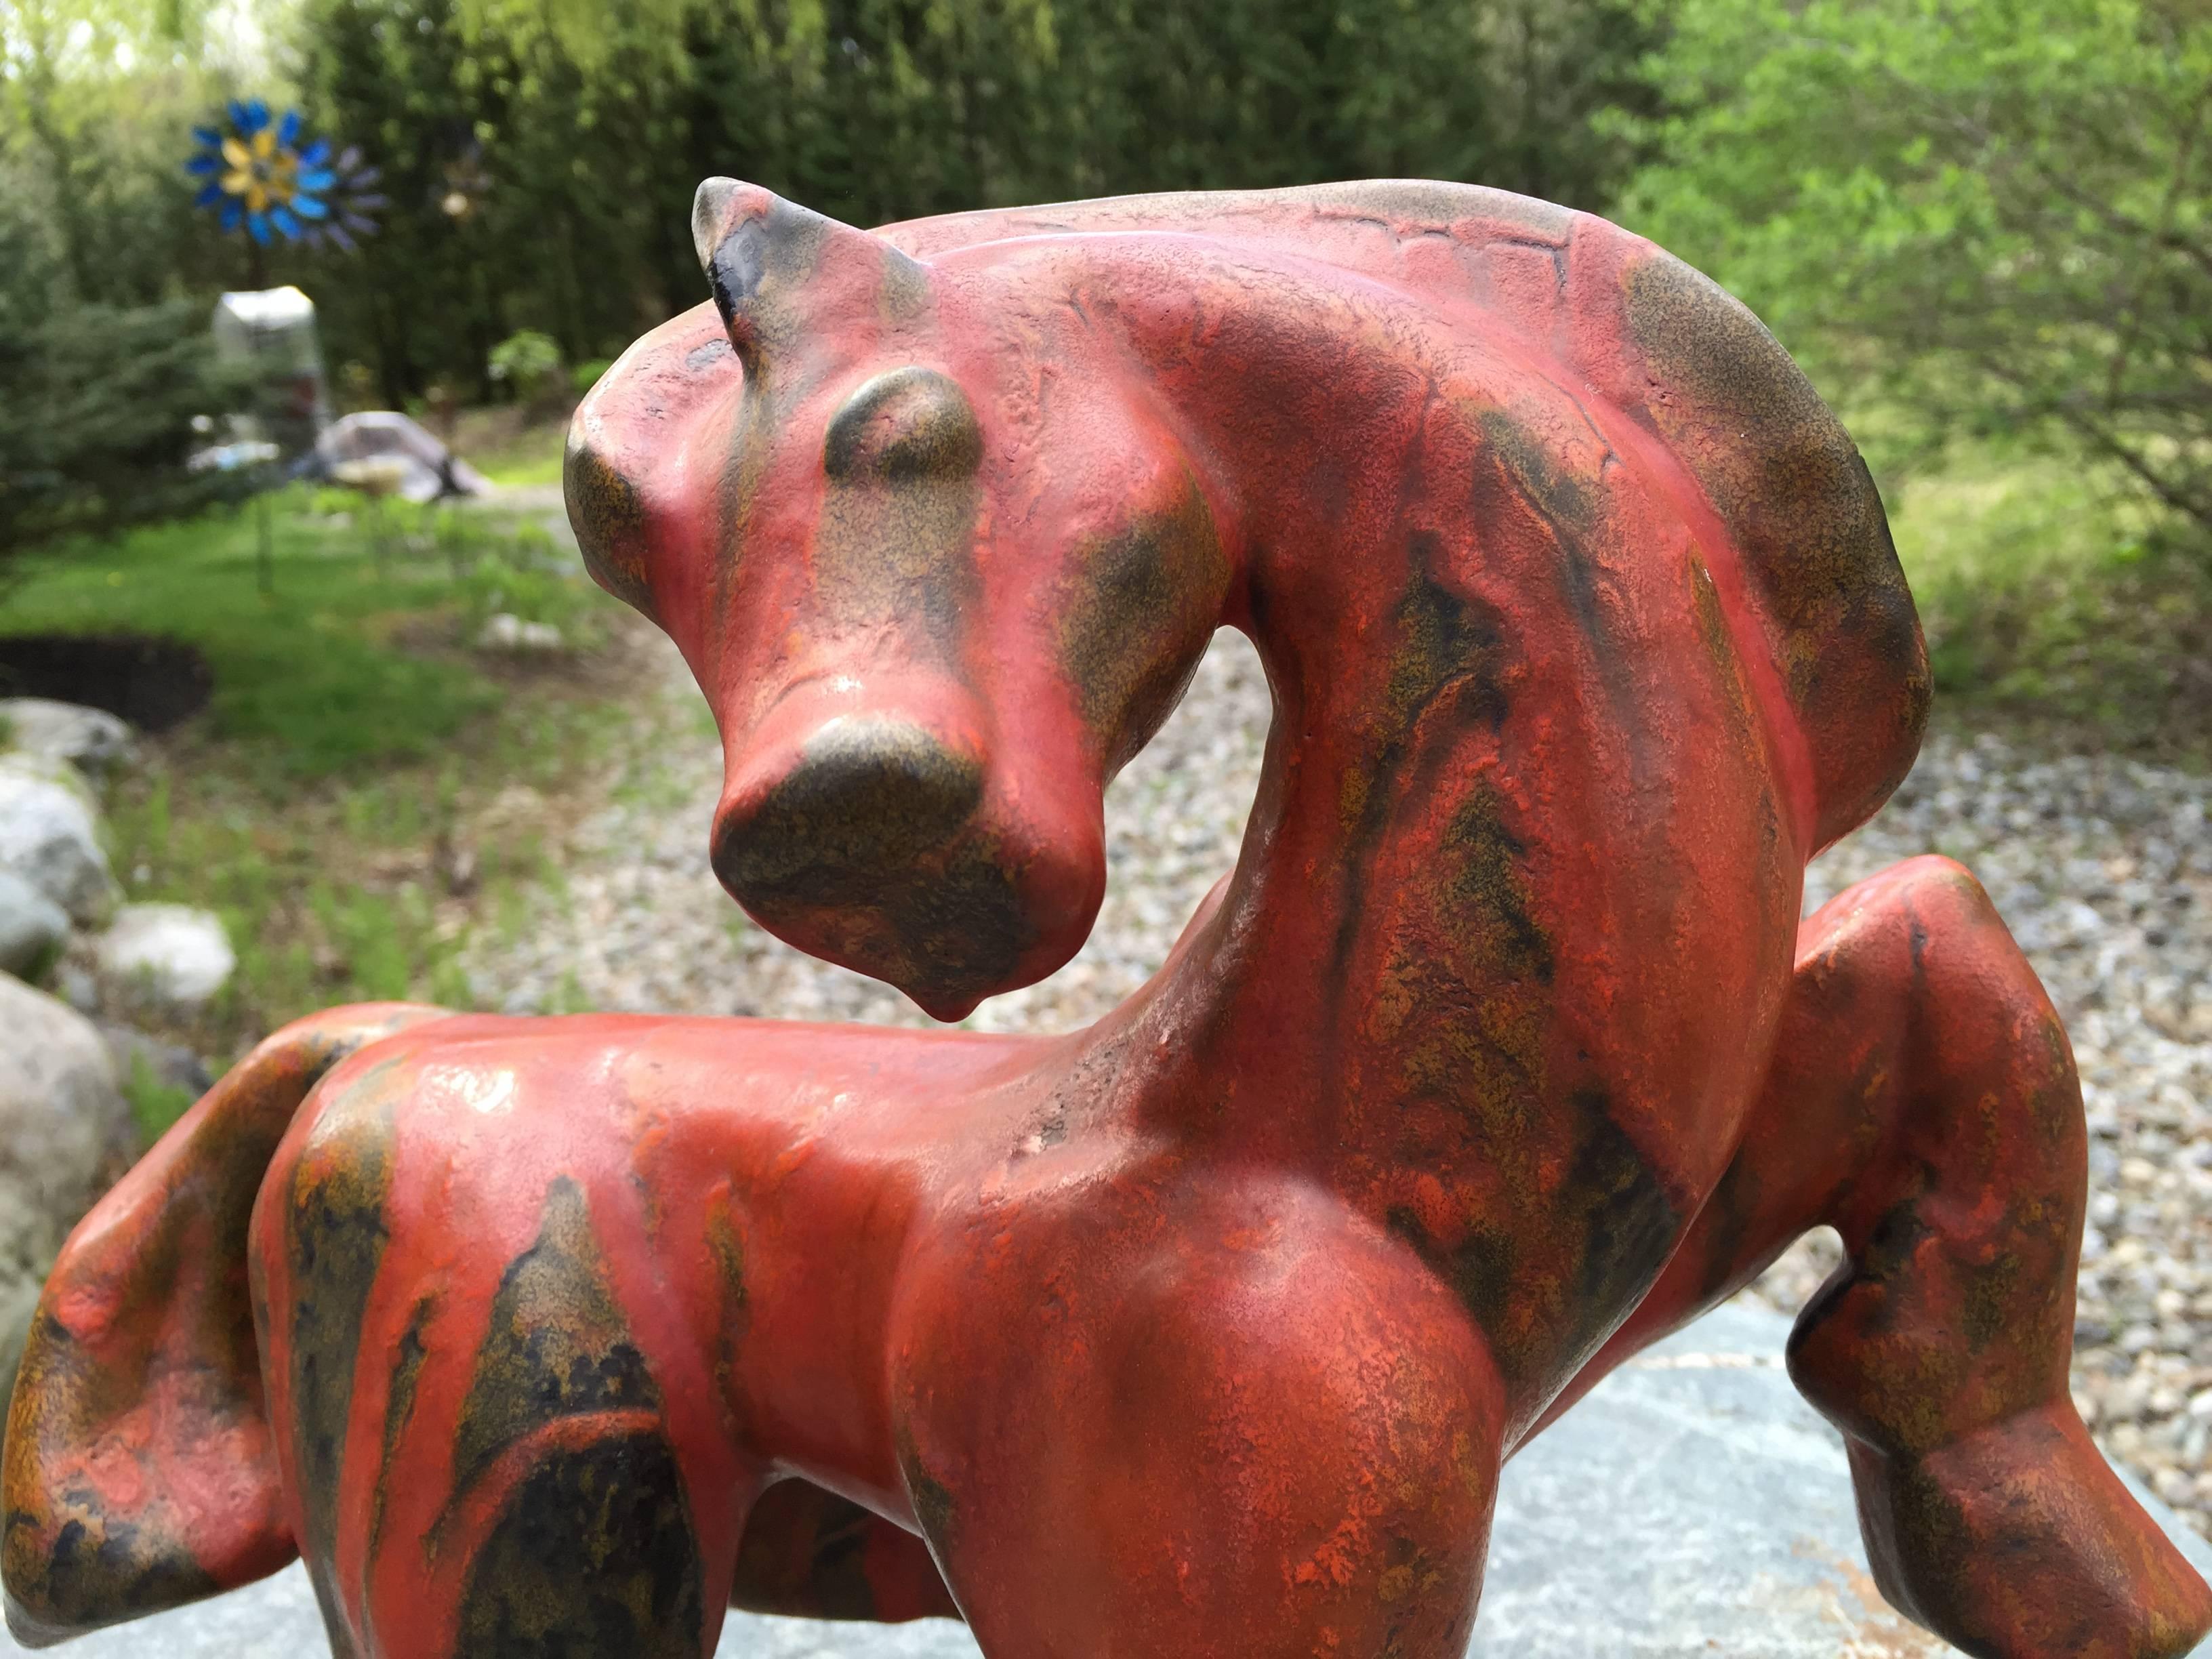 This is a large-scale master work and ceramic effigy of a horse or pony -a wonderful hand glazed modernist work of art possibly by the highly regarded Scheurich German pottery kiln mid last century. It is in virtually mint condition. Beautiful